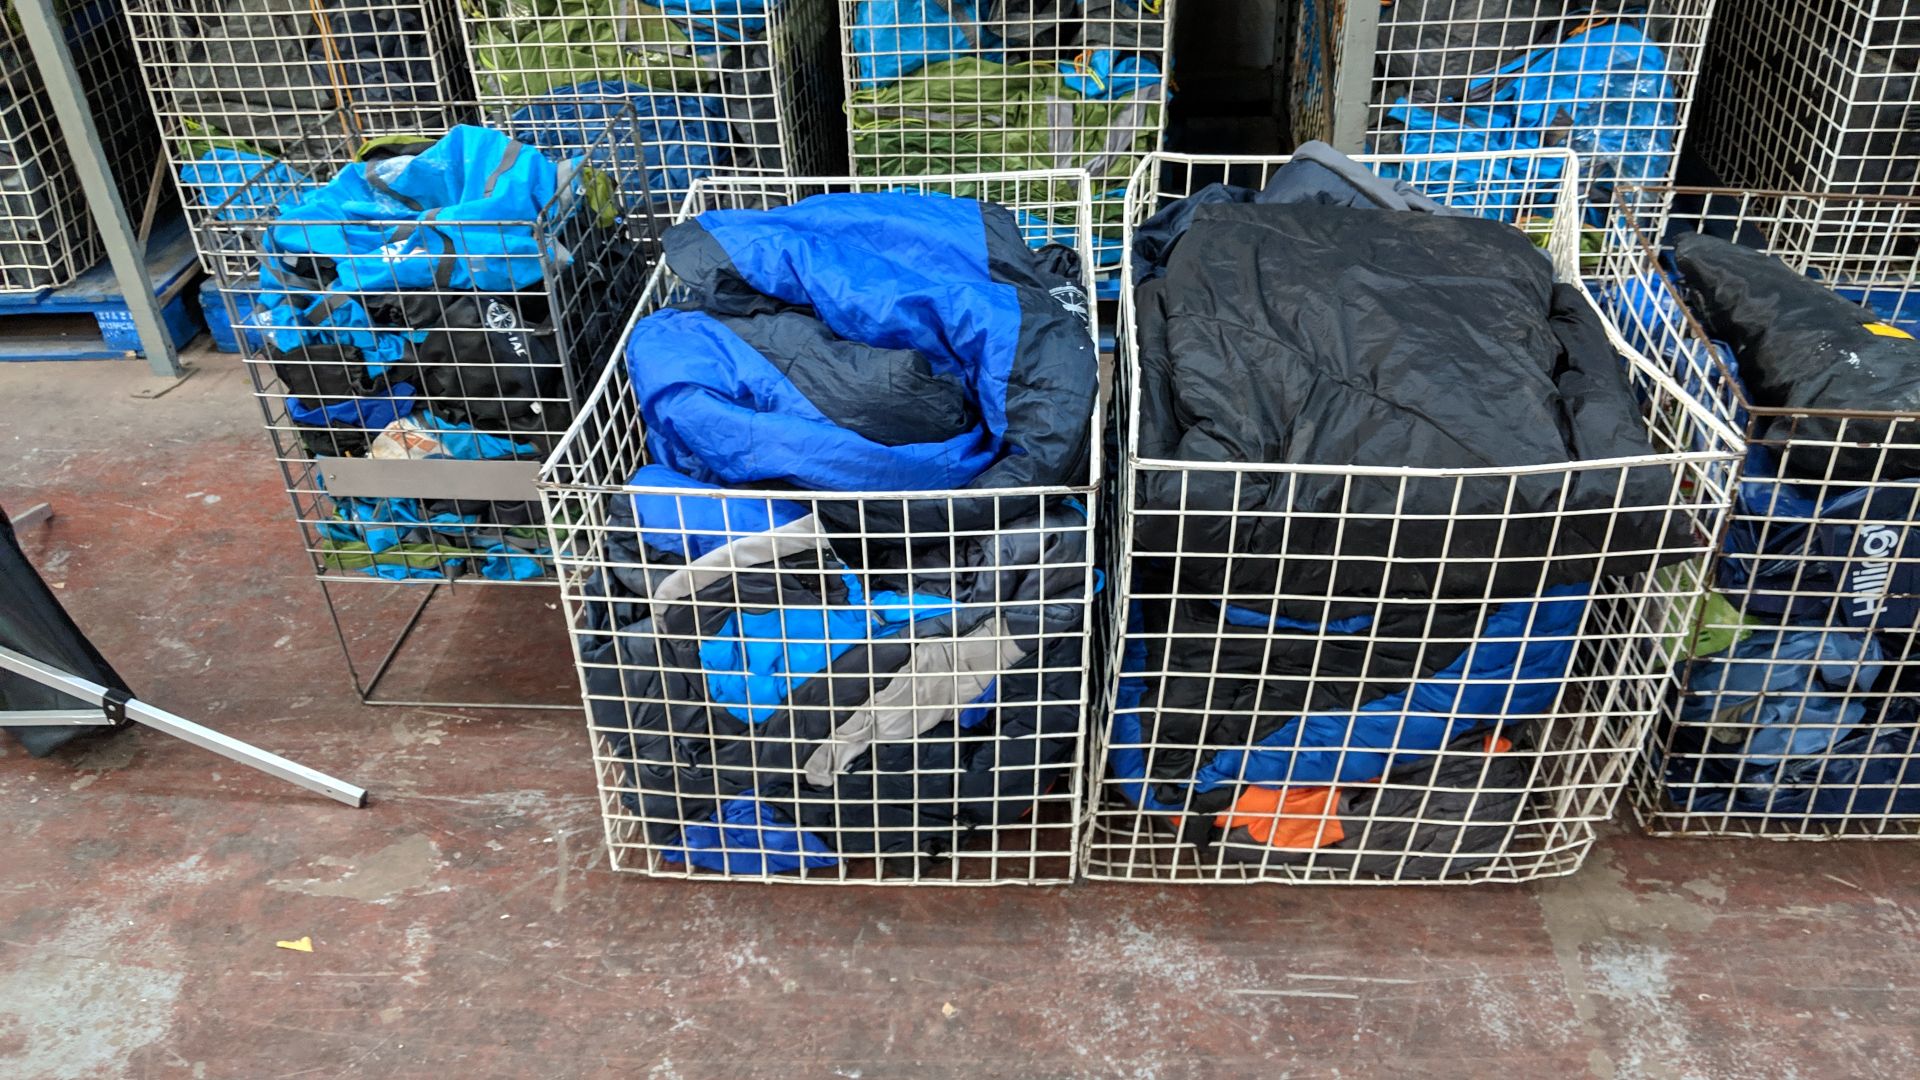 Contents of 2 cages of sleeping bags plus 1 smaller cage of bags for putting sleeping bags in -